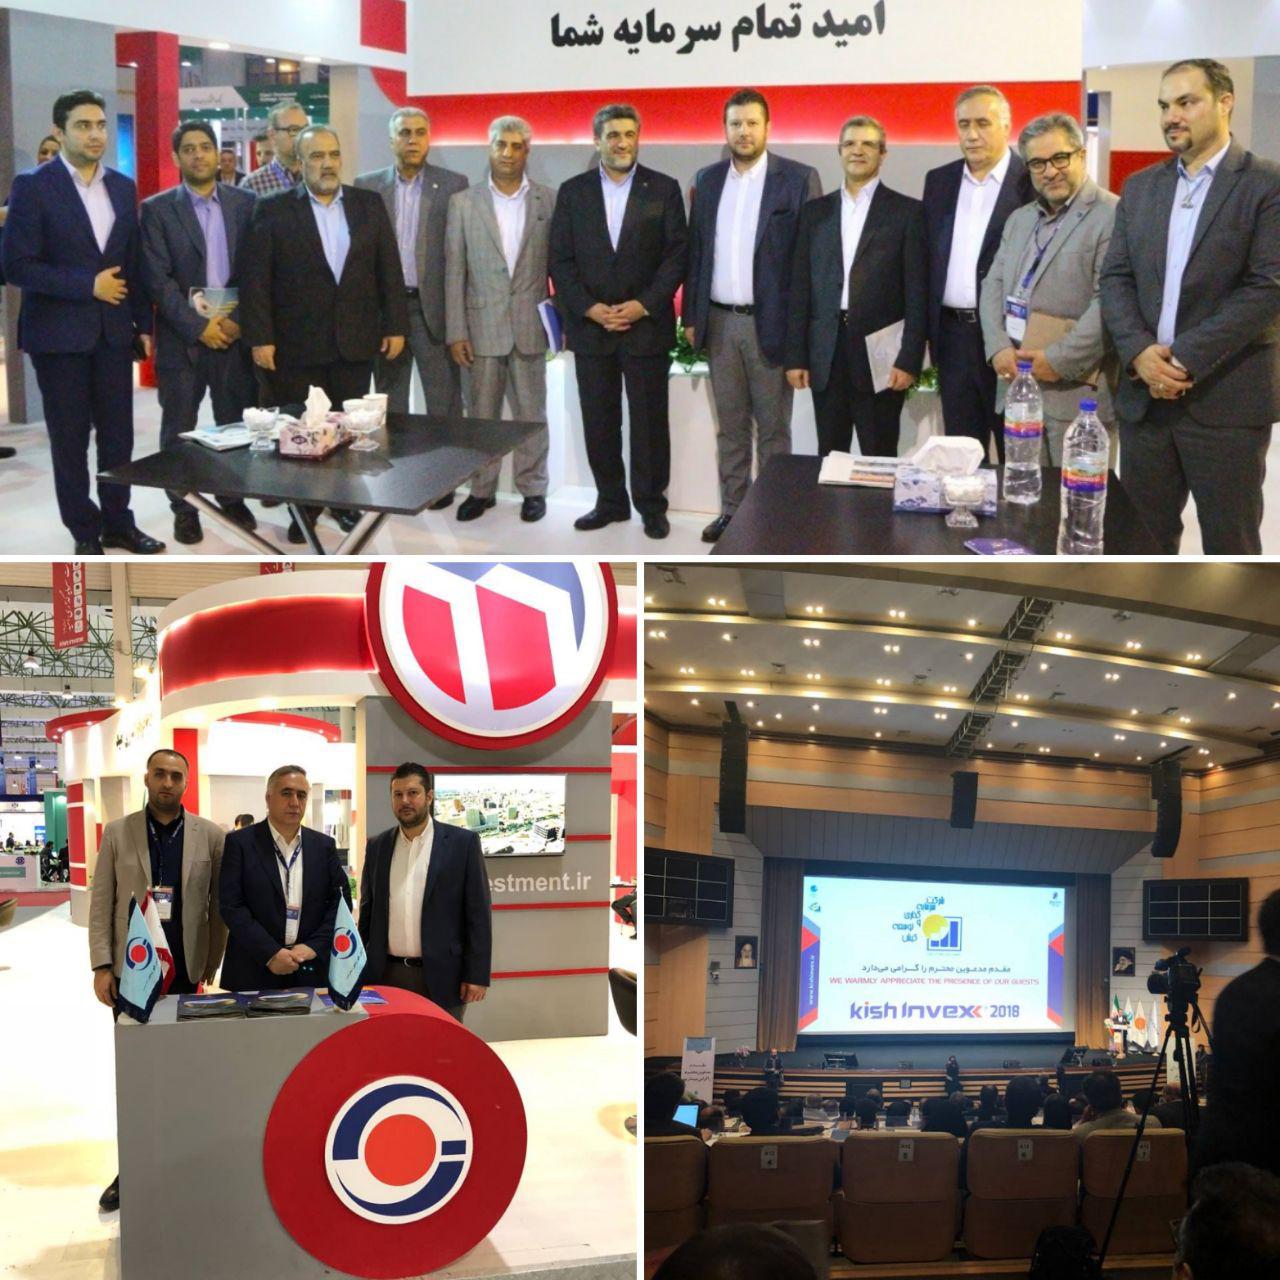 The active participation of Goharzamin Company in the exhibition of investment opportunities for the stock market, banks and insurance and privatization